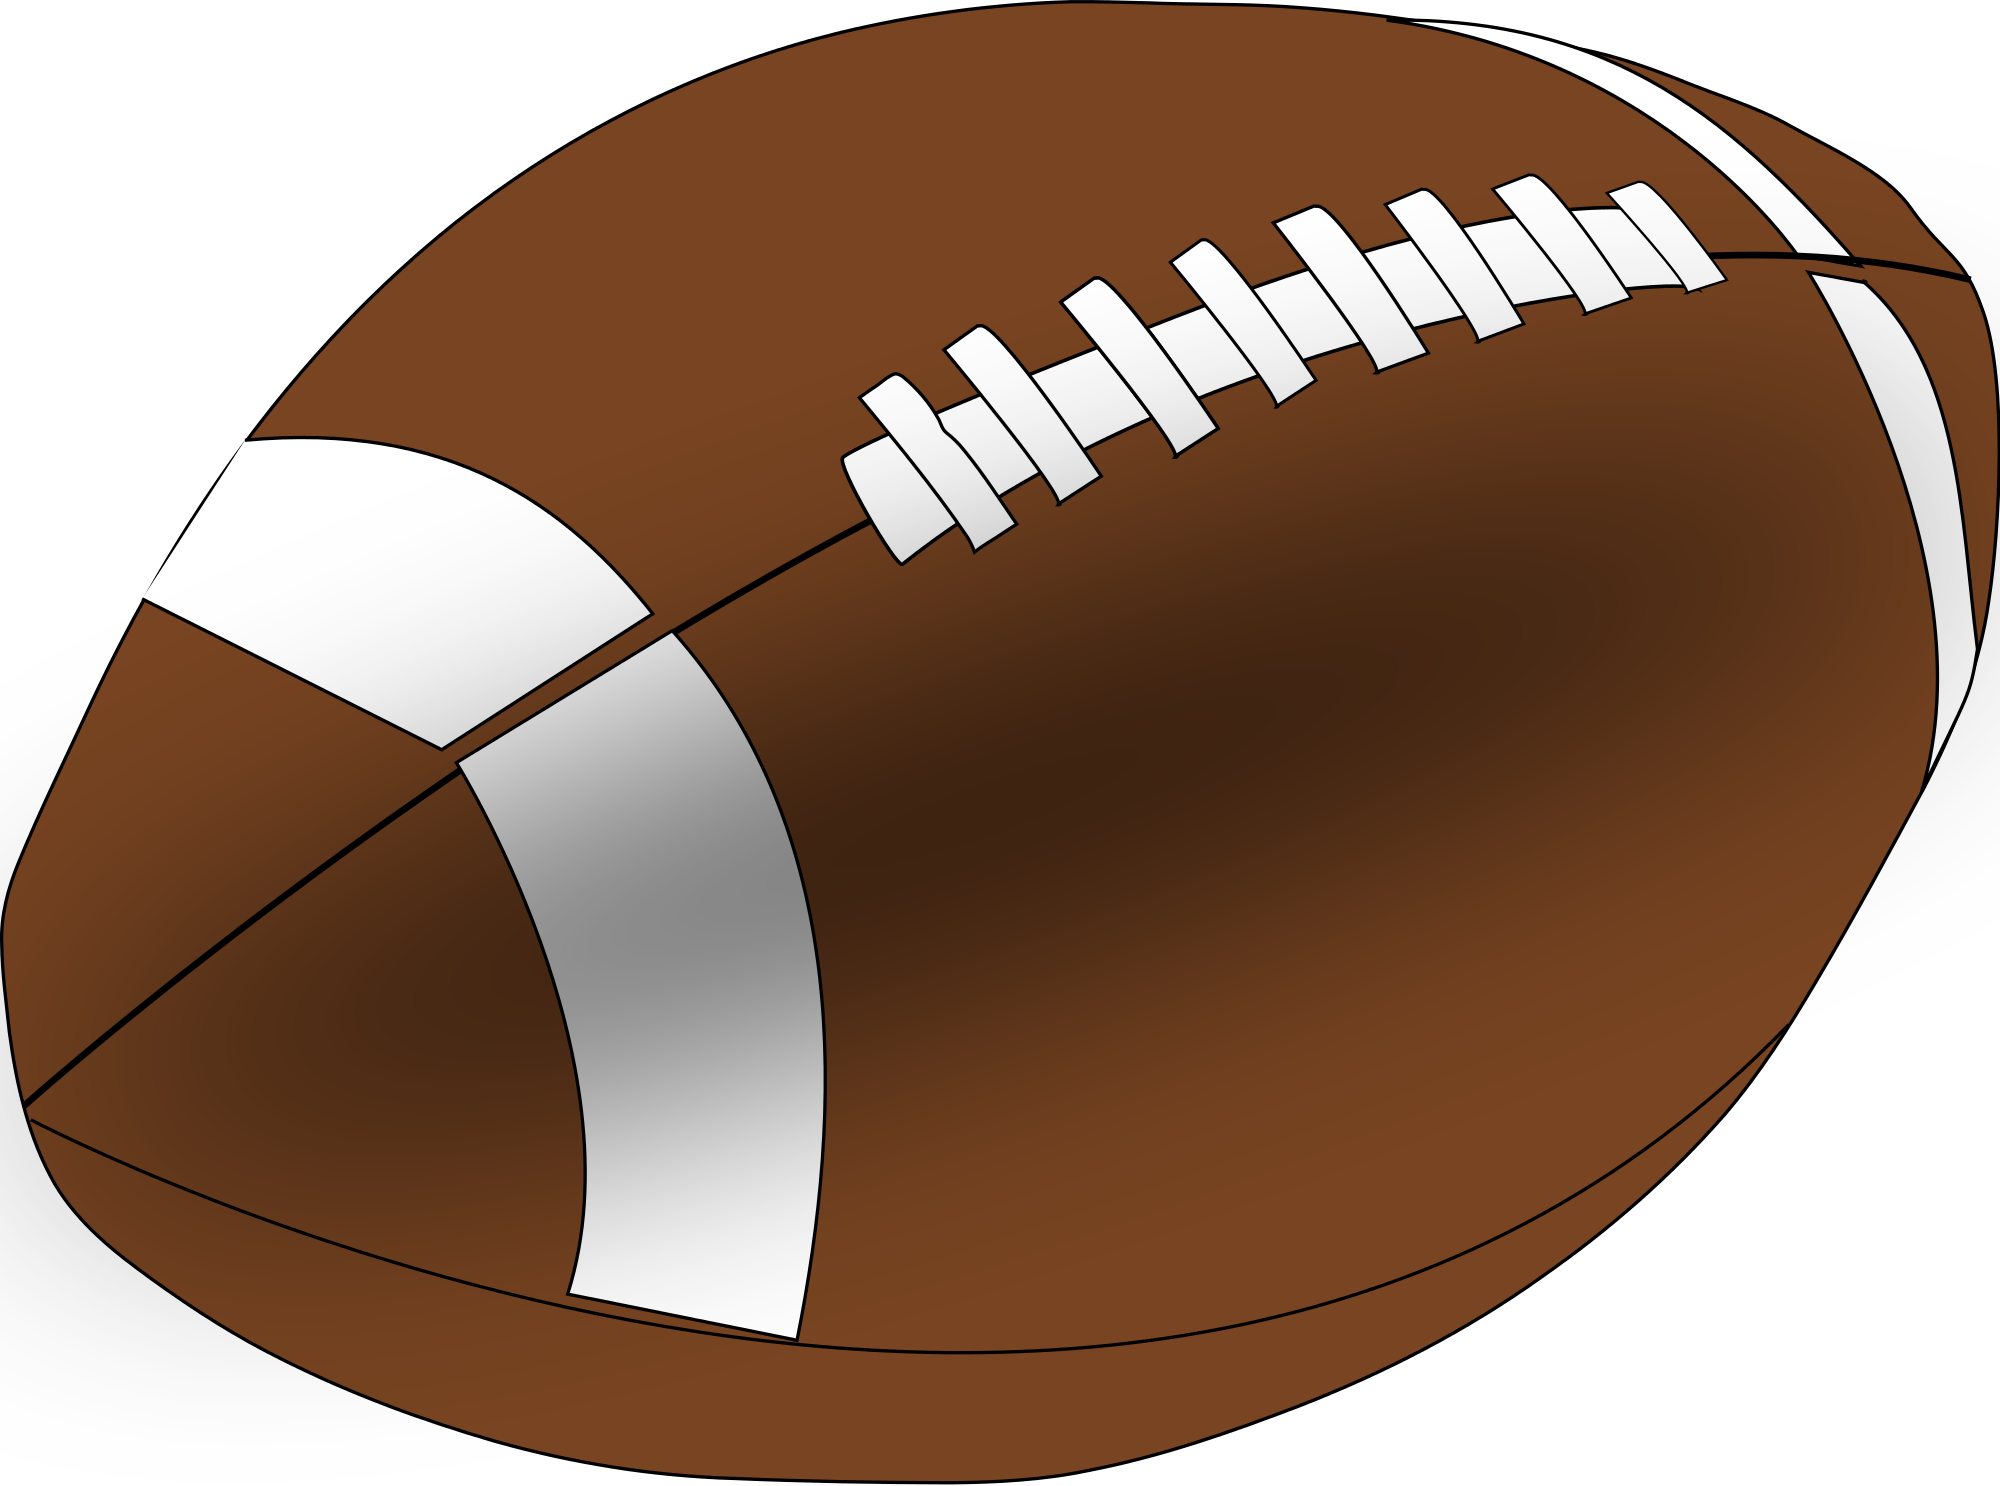 American Football PNG Image Transparent Background